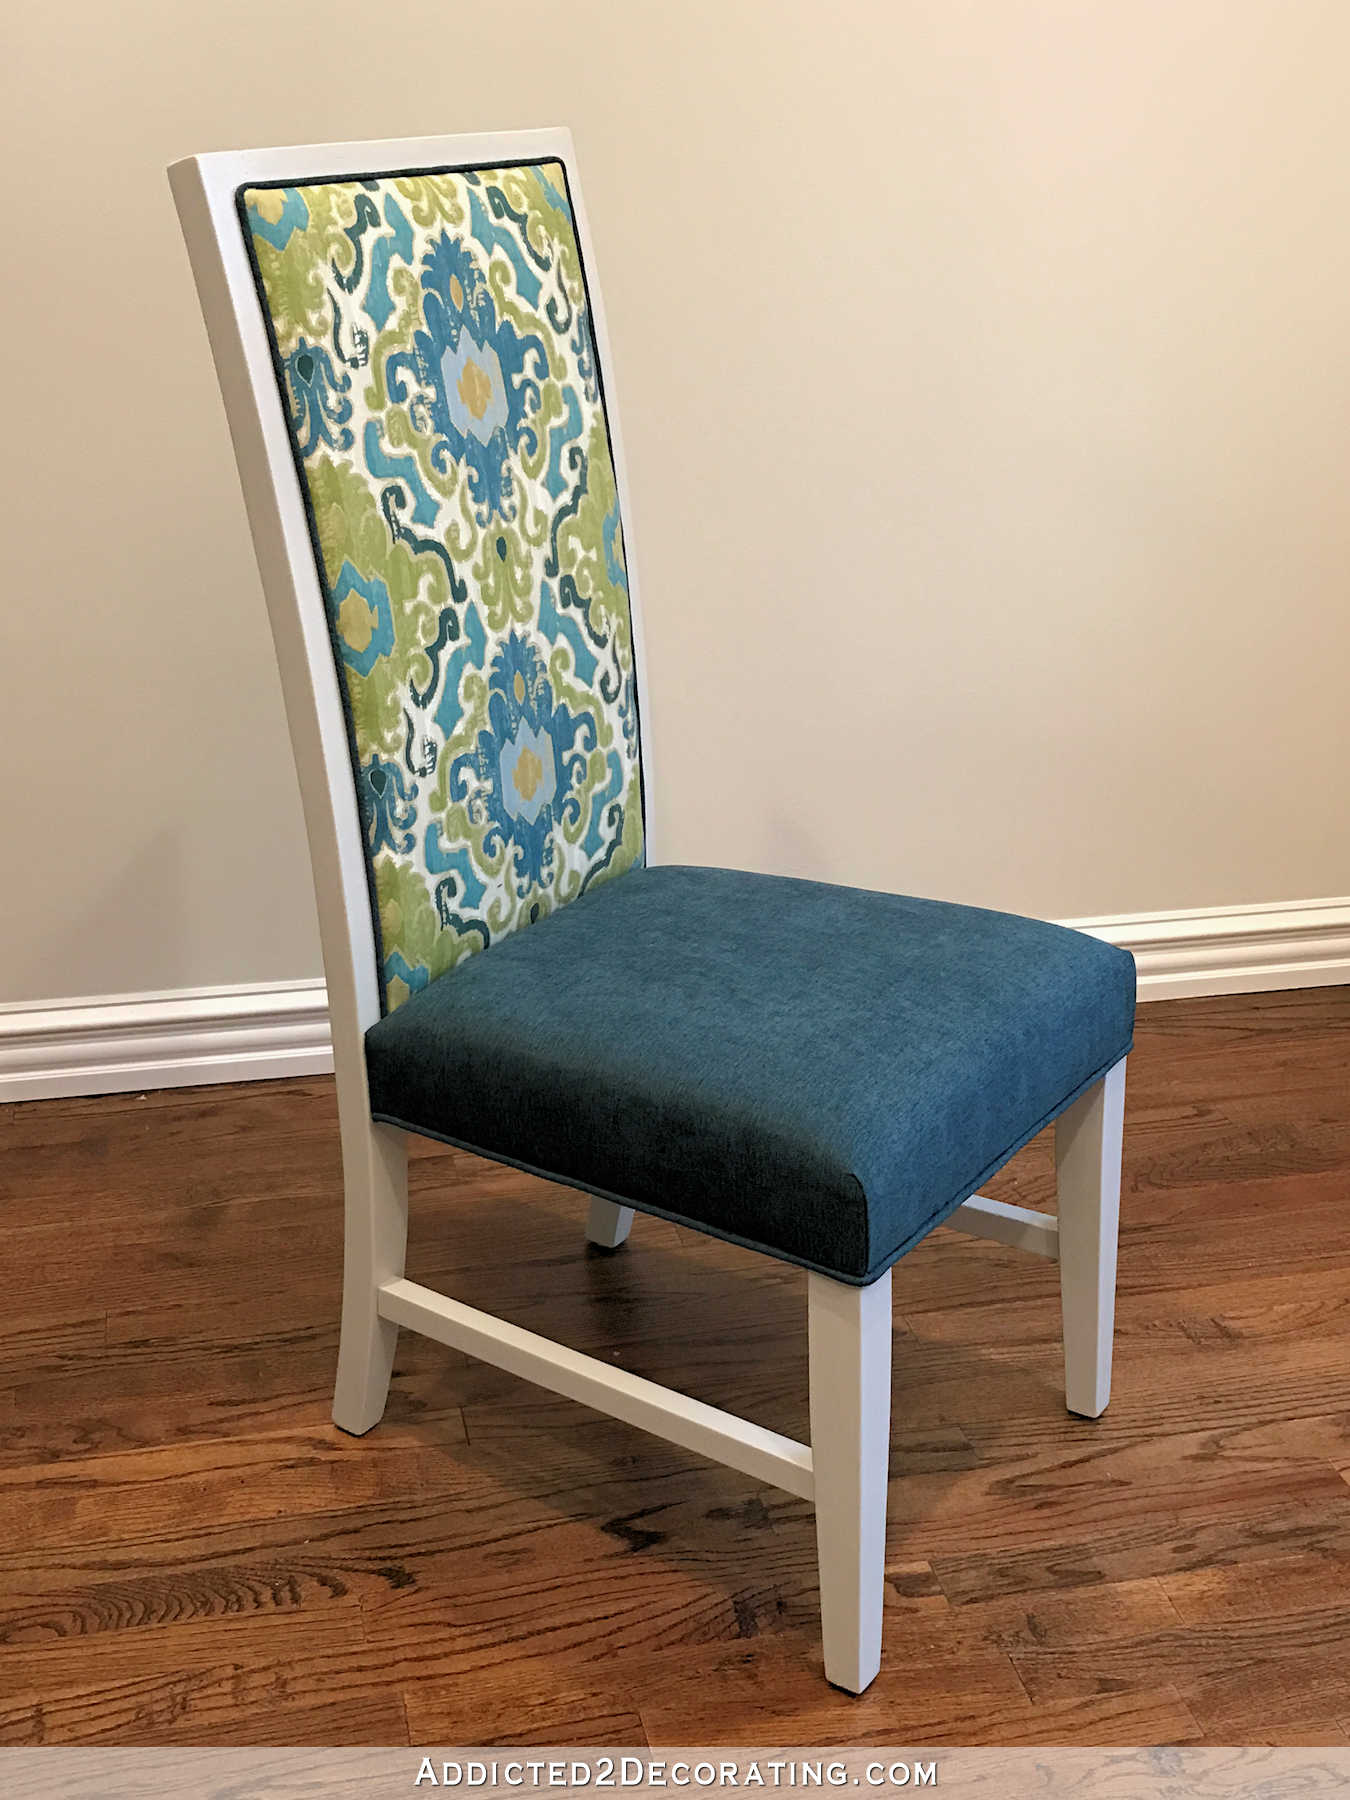 breakfast room dining chair makeover - after - side view front upholstered backrest and seat